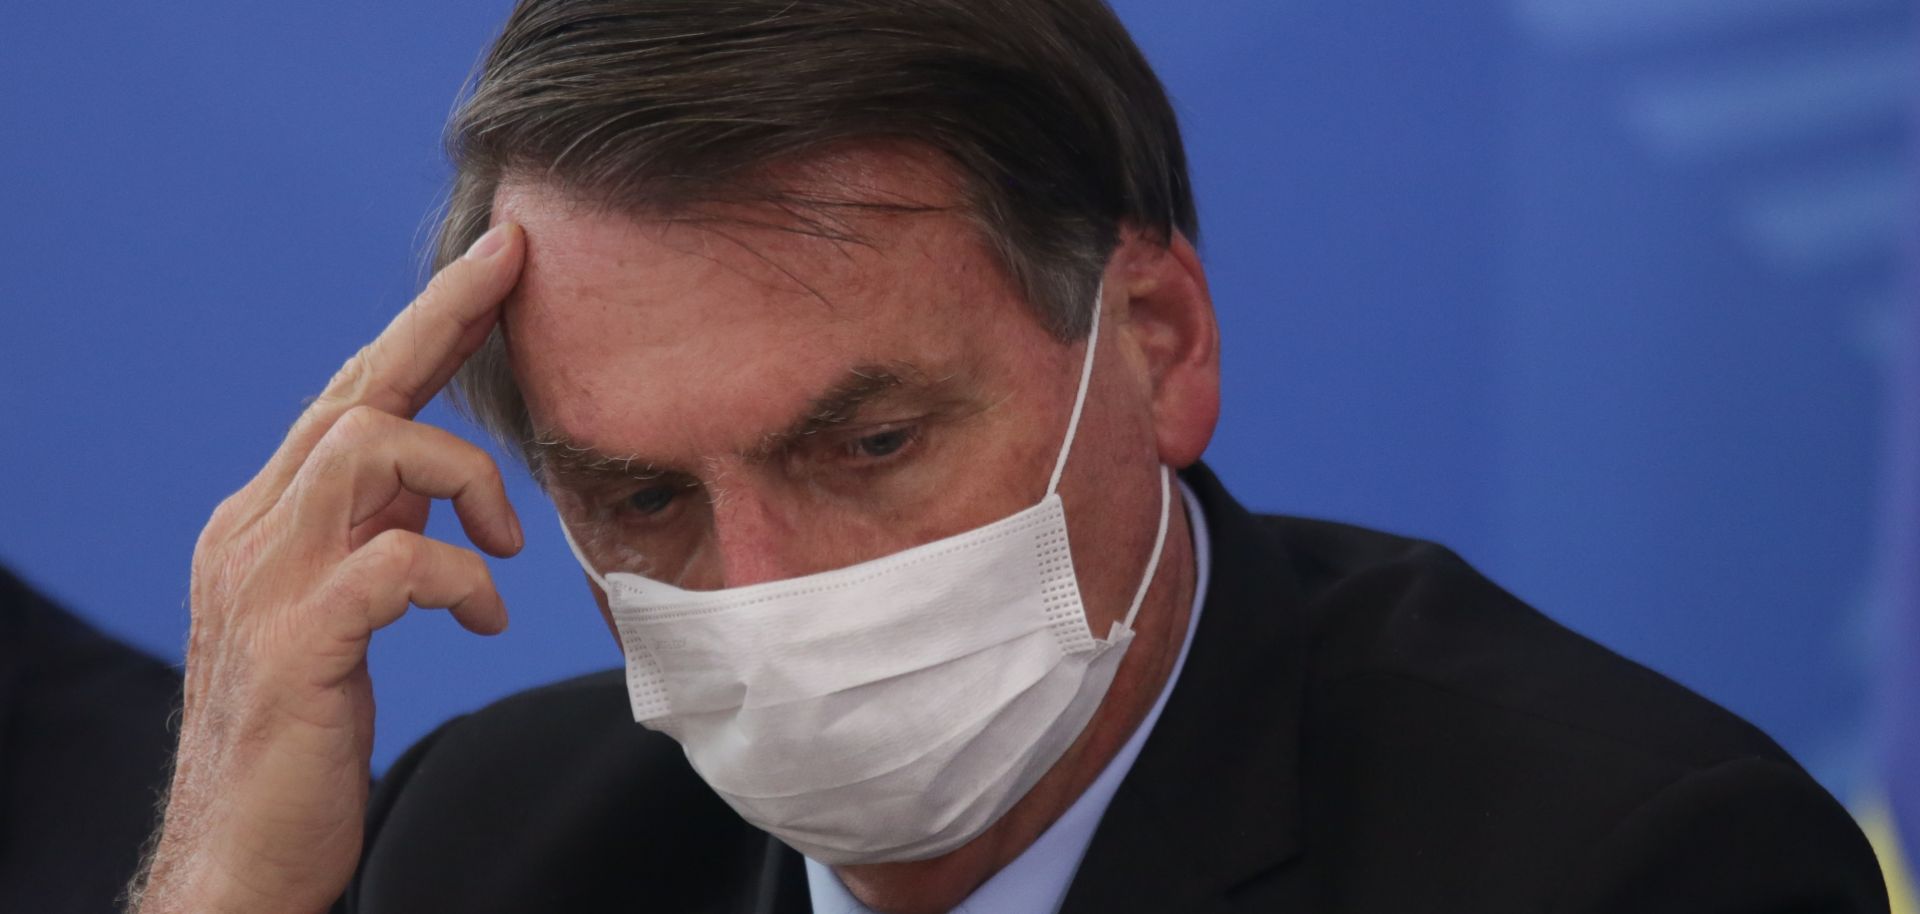 Wearing a protective mask, Brazilian President Jair Bolsonaro takes to questions regarding the country's coronavirus outbreak during a press conference at the Planalto Palace in Brasilia on March 18, 2020. 